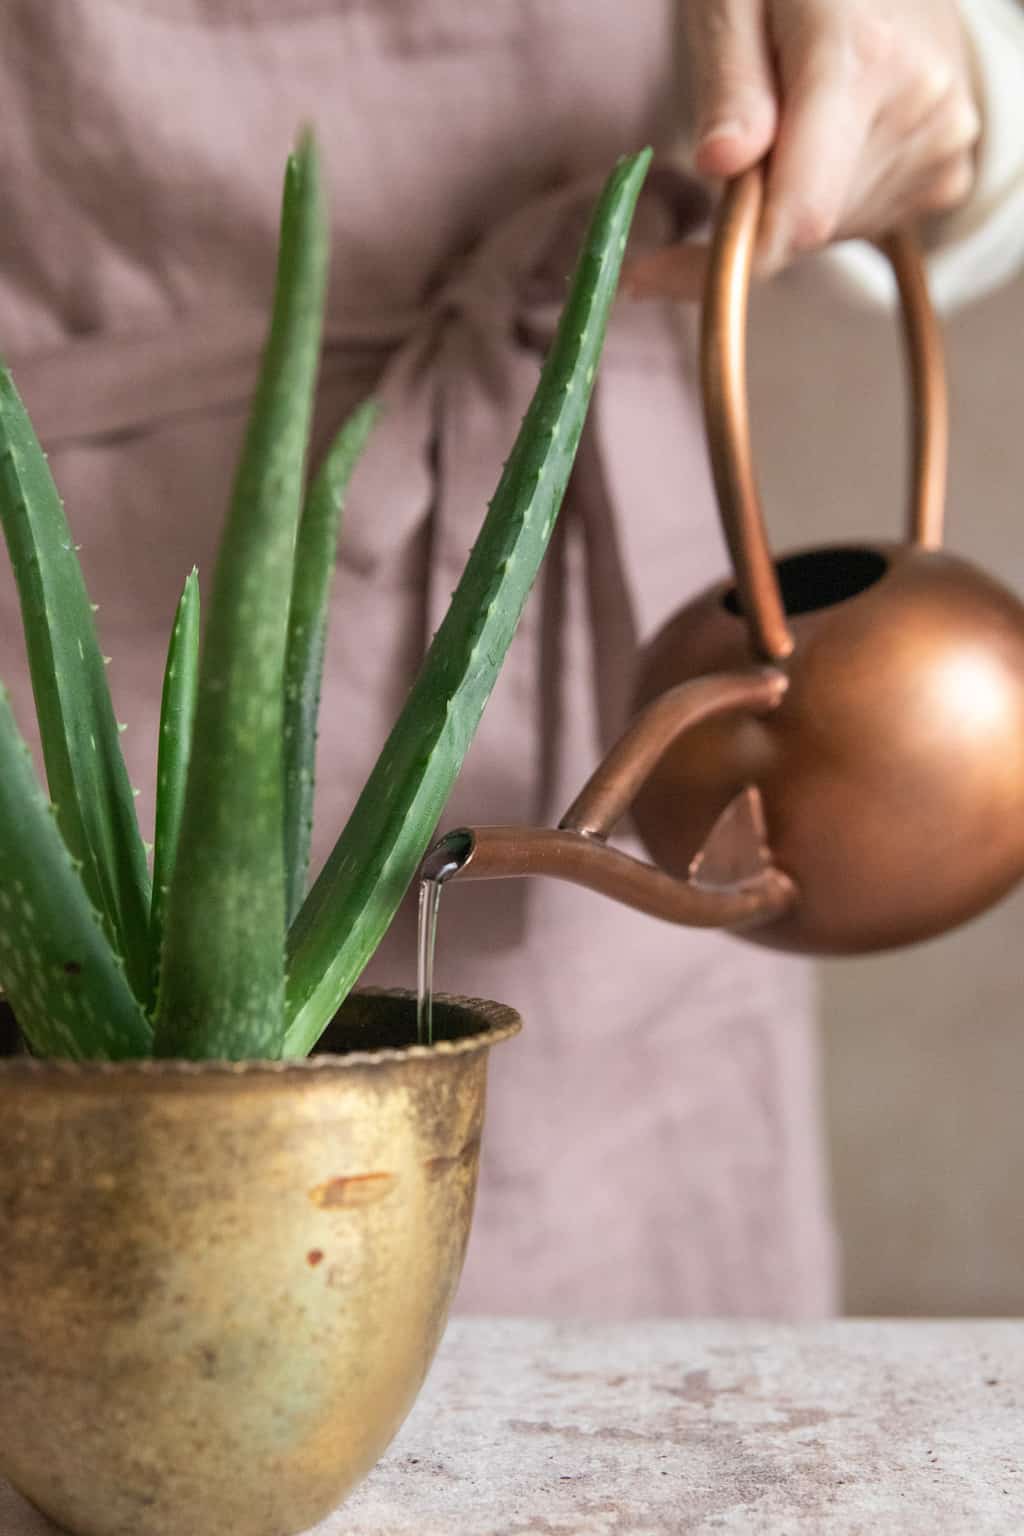 Rules for watering aloe vera plants